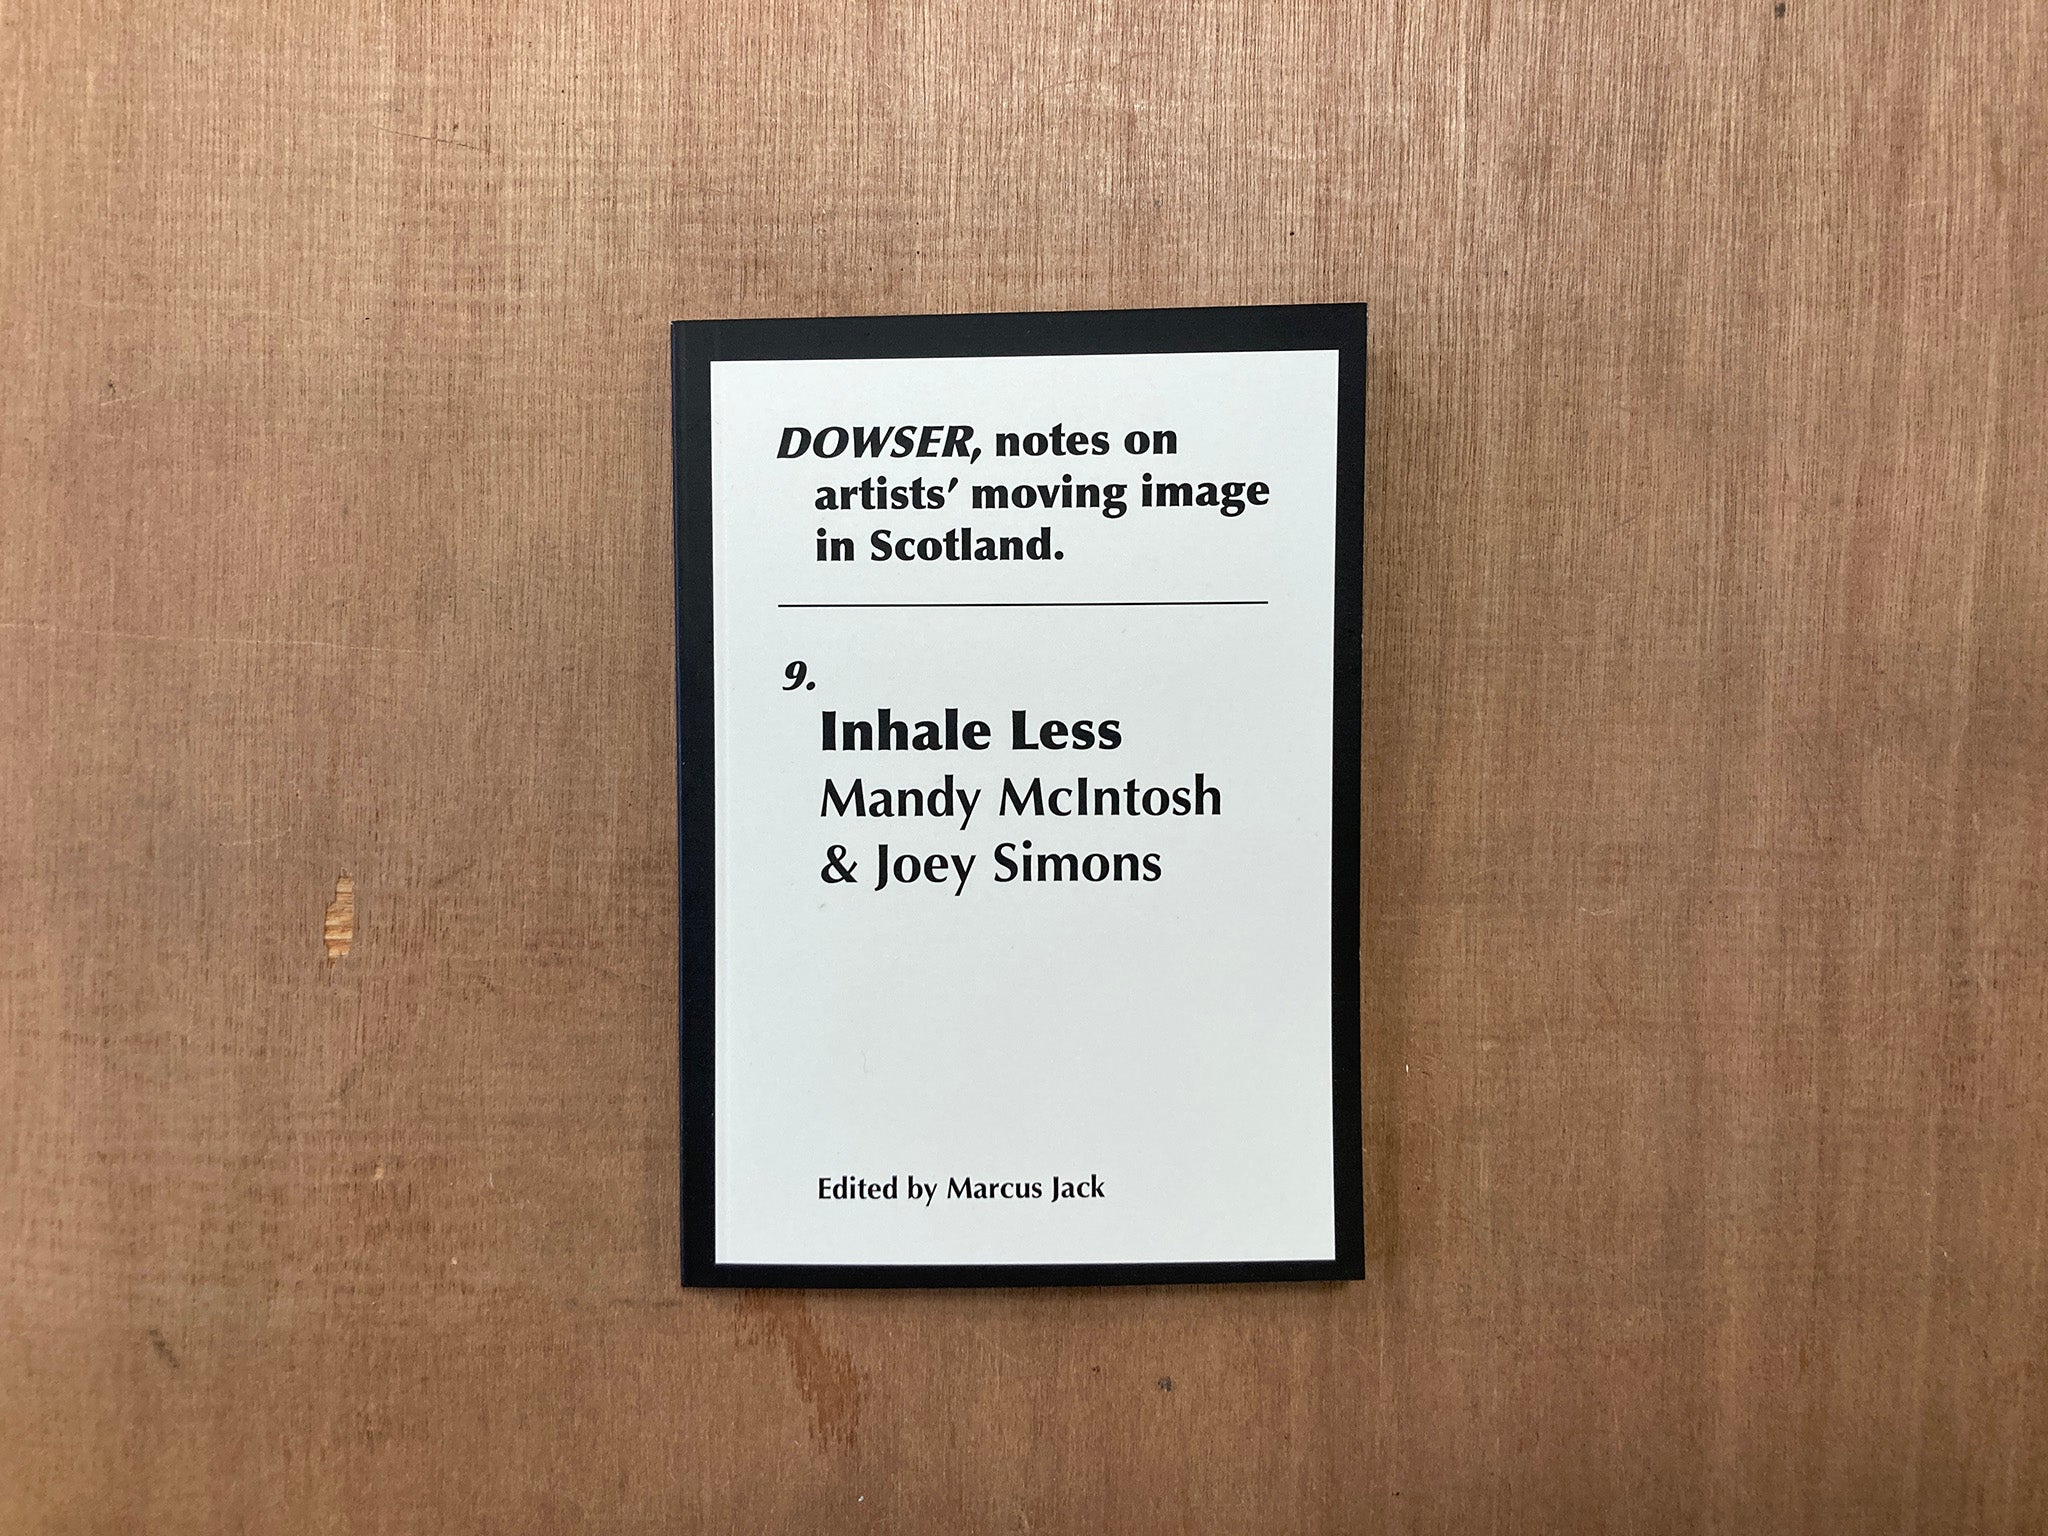 DOWSER ISSUE 9: INHALE LESS by Mandy McIntosh and Joey Simons